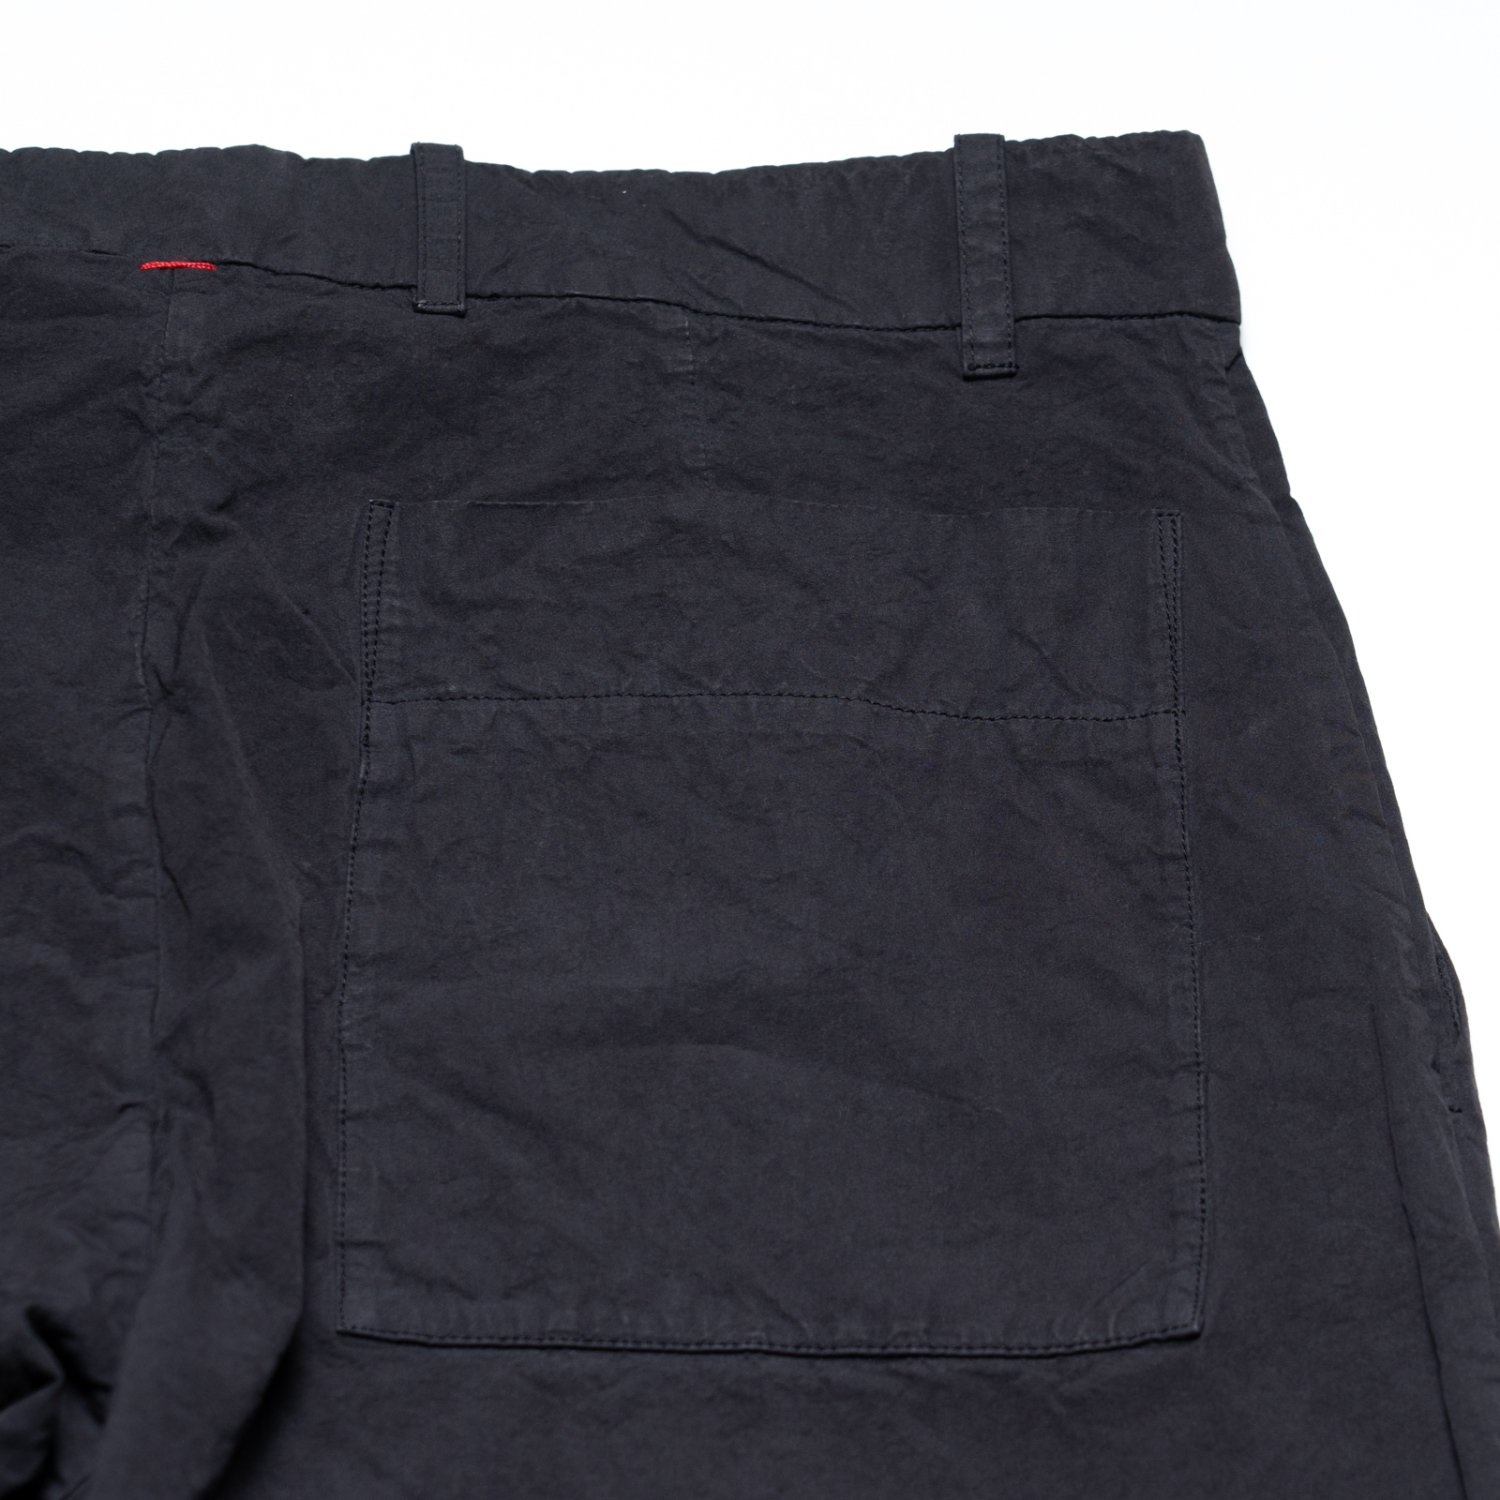 CASEY CASEY * 23AW DROP1 21HP202 DOUBLE DYED AH PANT TOUGH COT * Onyx